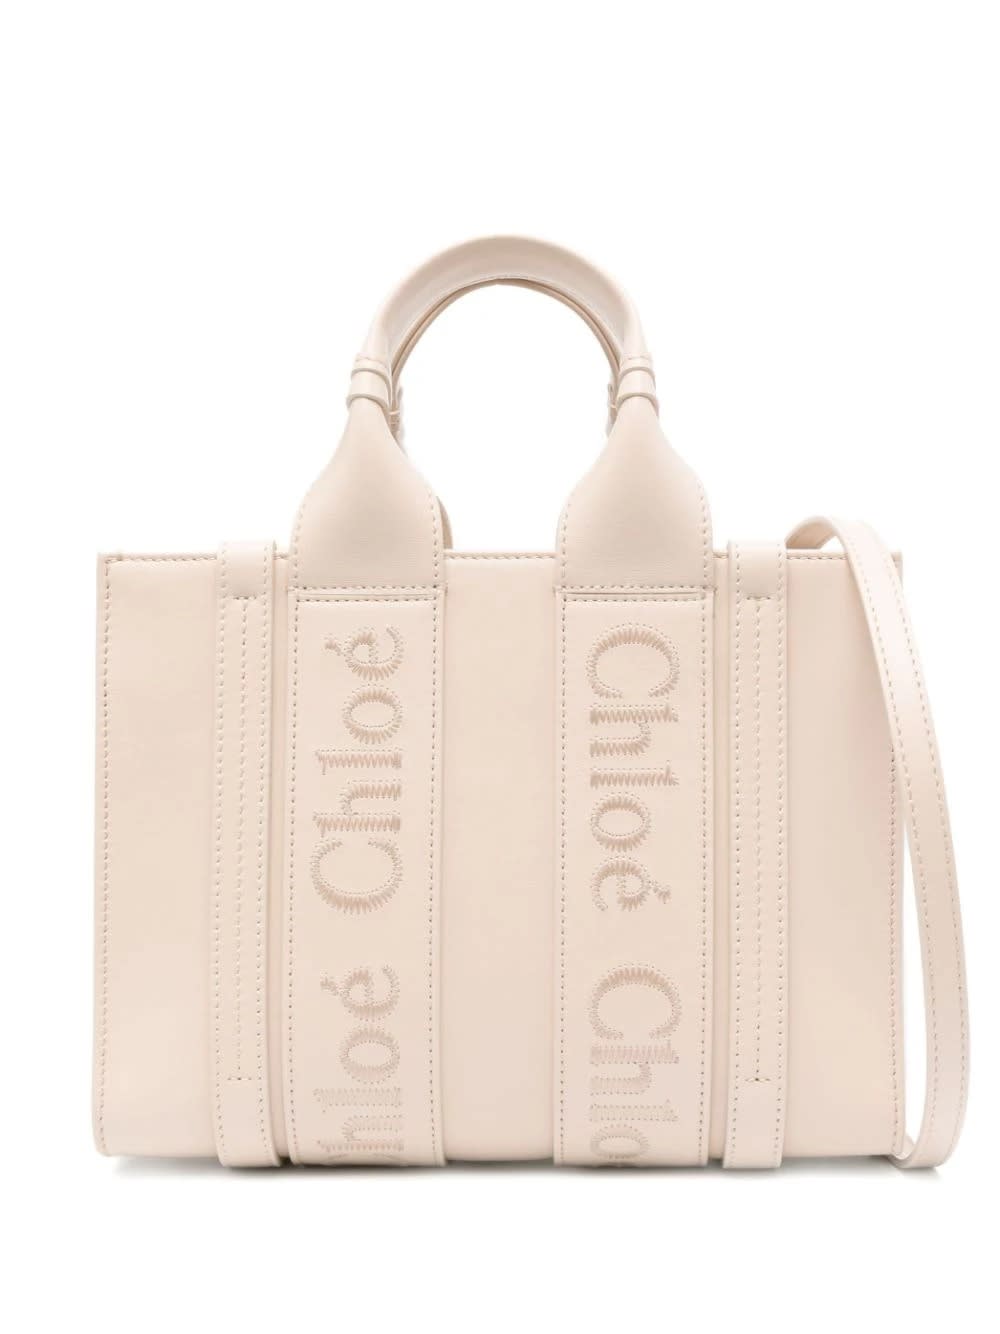 CHLOÉ WOODY SMALL SHOPPING BAG IN CEMENT PINK LEATHER